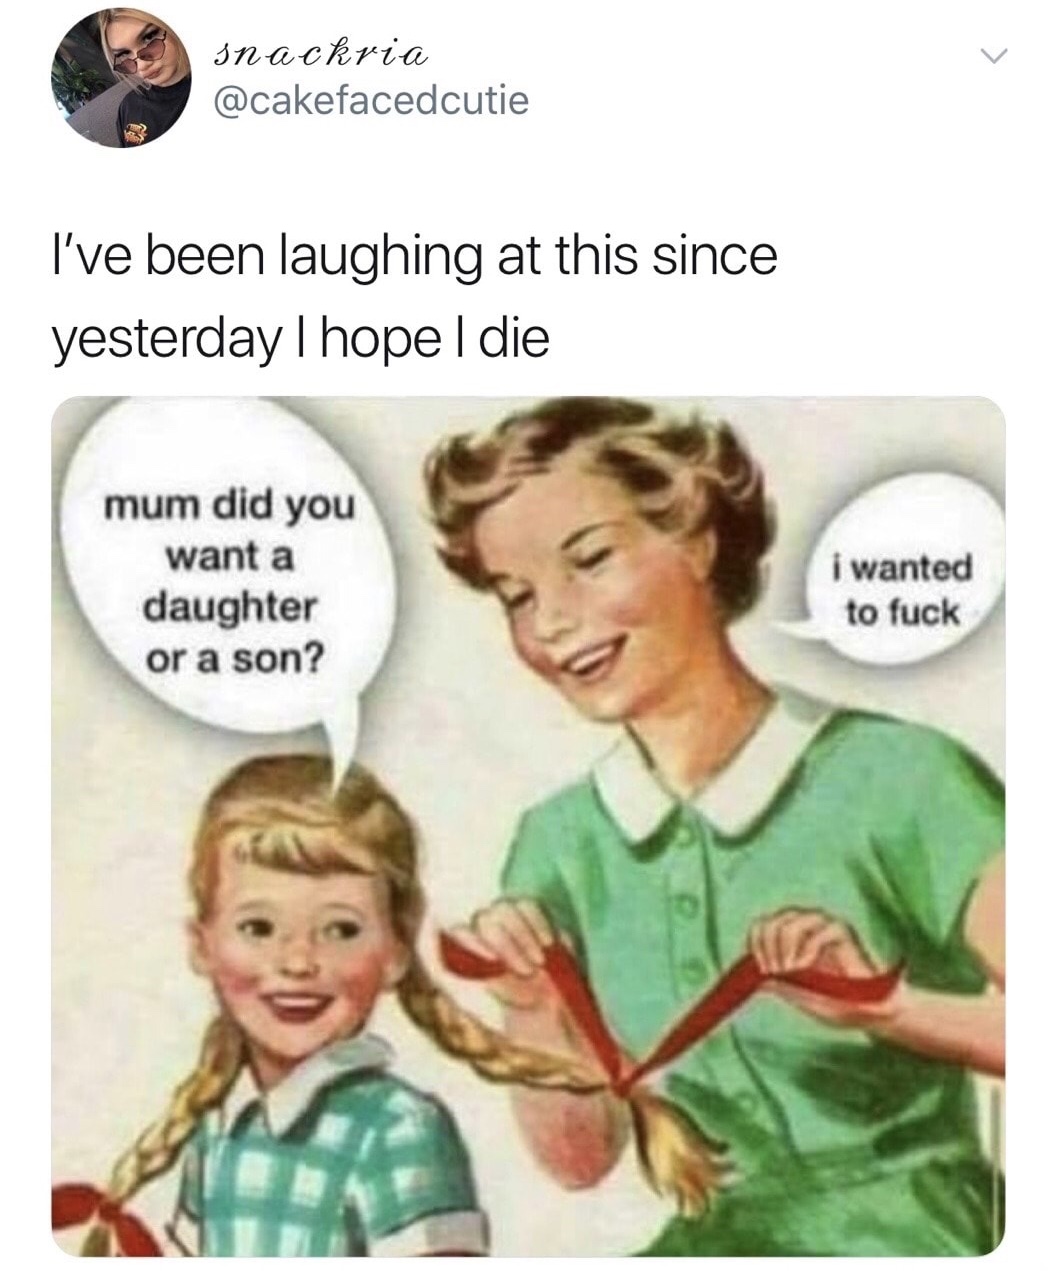 mum did you want a daughter - snackria I've been laughing at this since yesterday I hope I die mum did you want a daughter or a son? I wanted to fuck